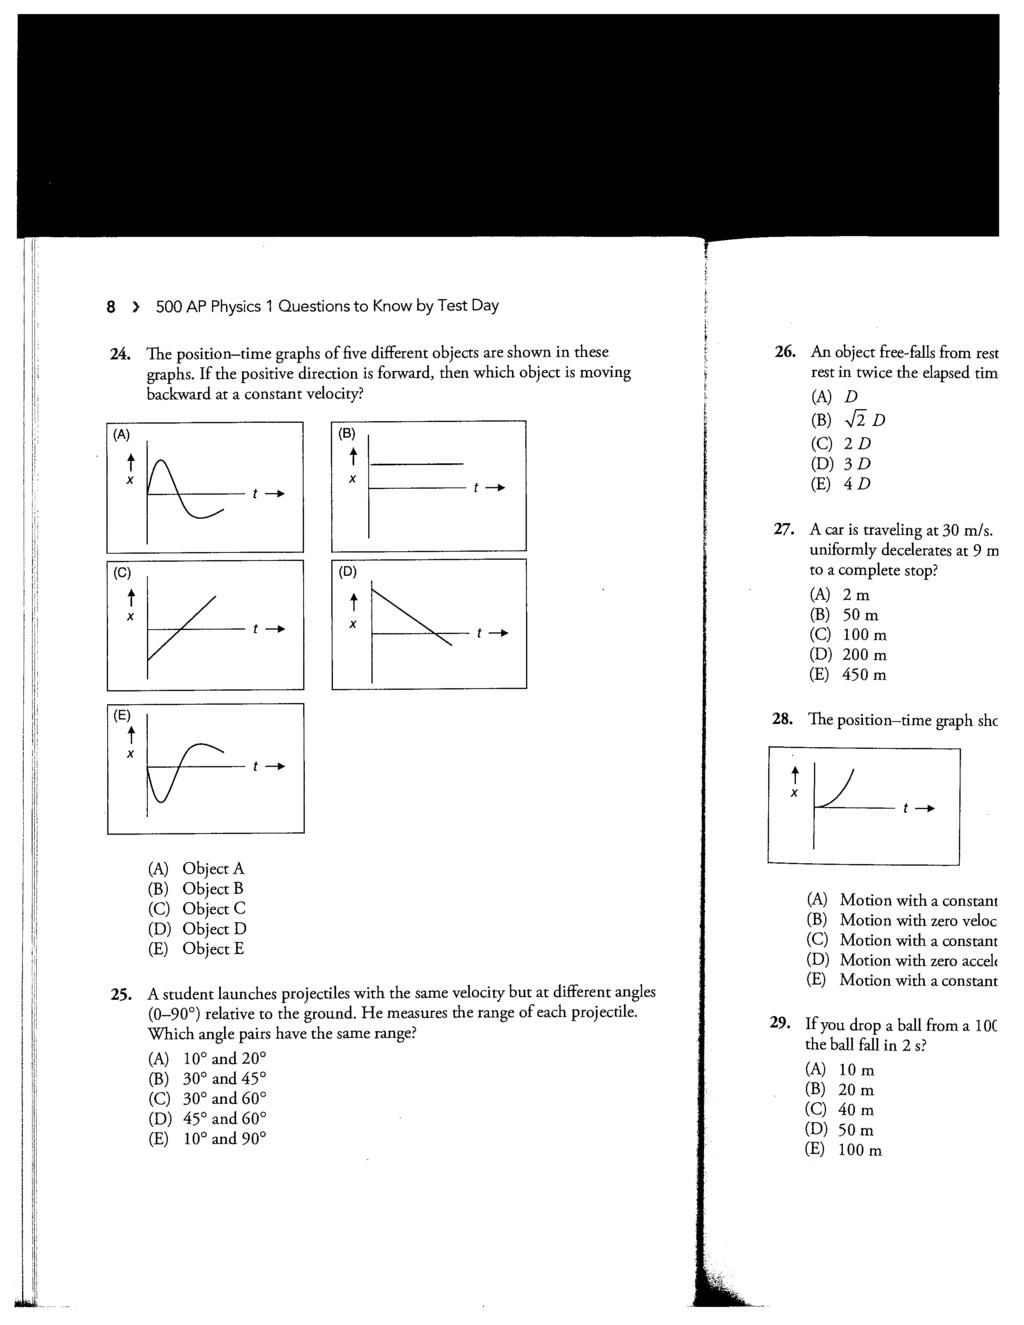 8 > 500 AP Physics 1 Questions to Know by Test Day 24. The position time graphs of five different objects are shown in these graphs.